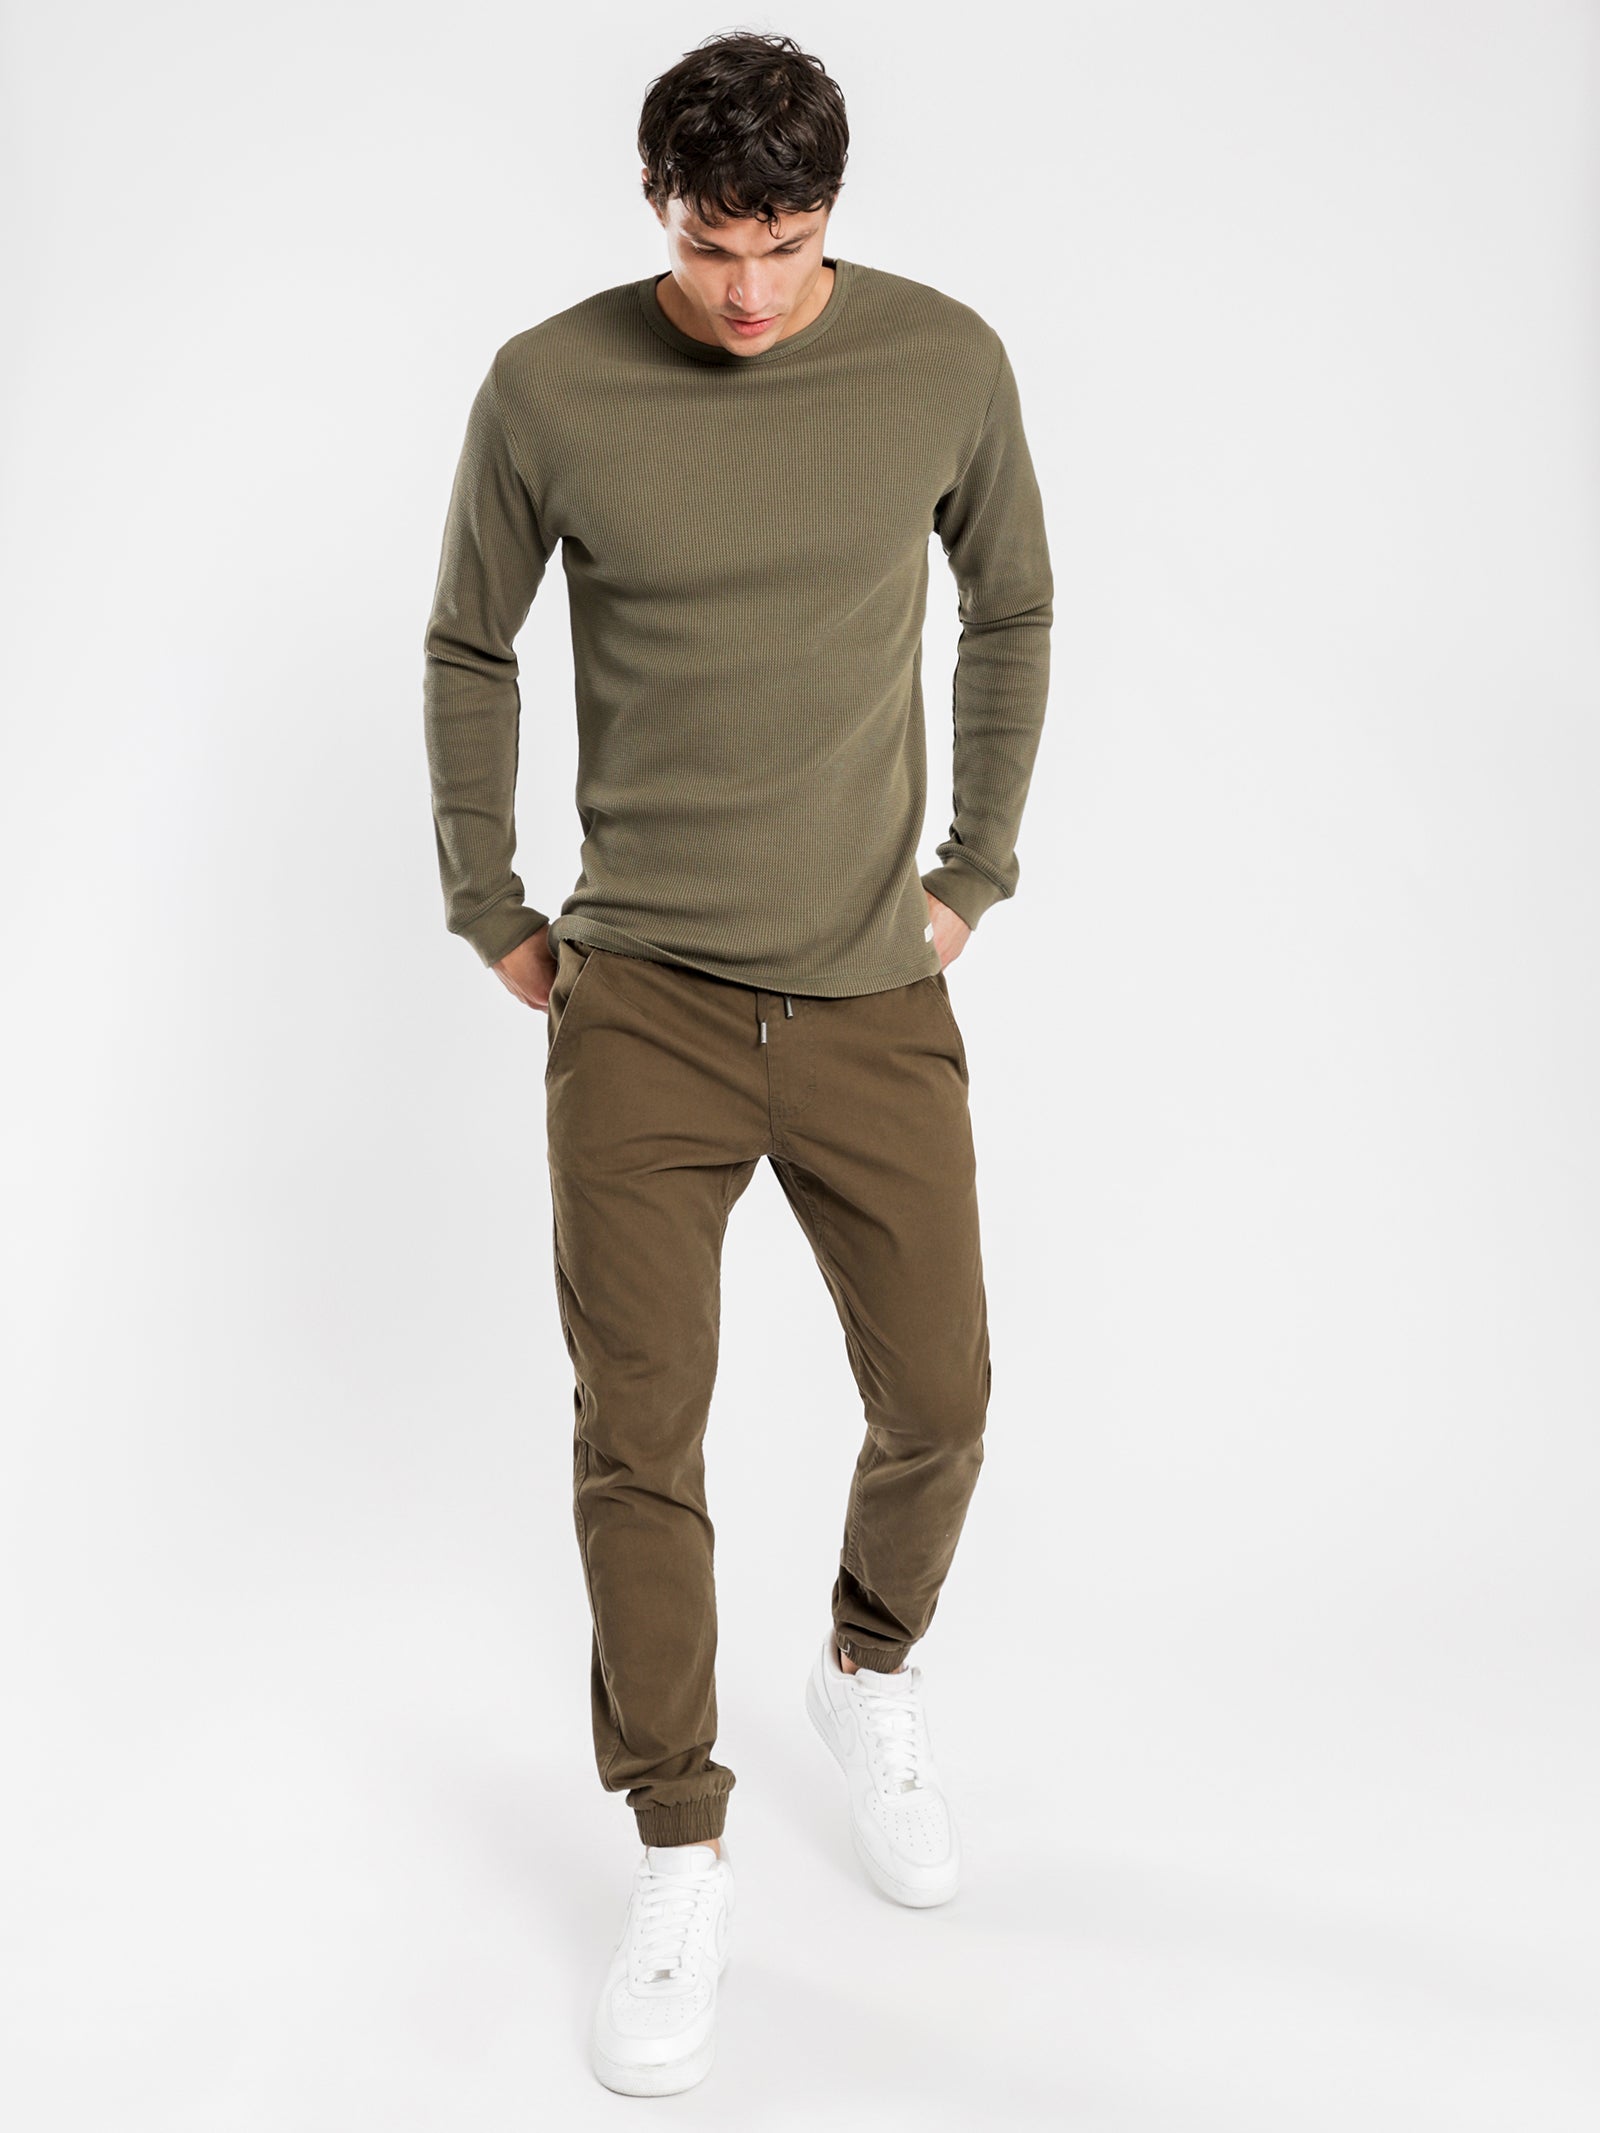 Boden Joggers in Olive Green Glue Store